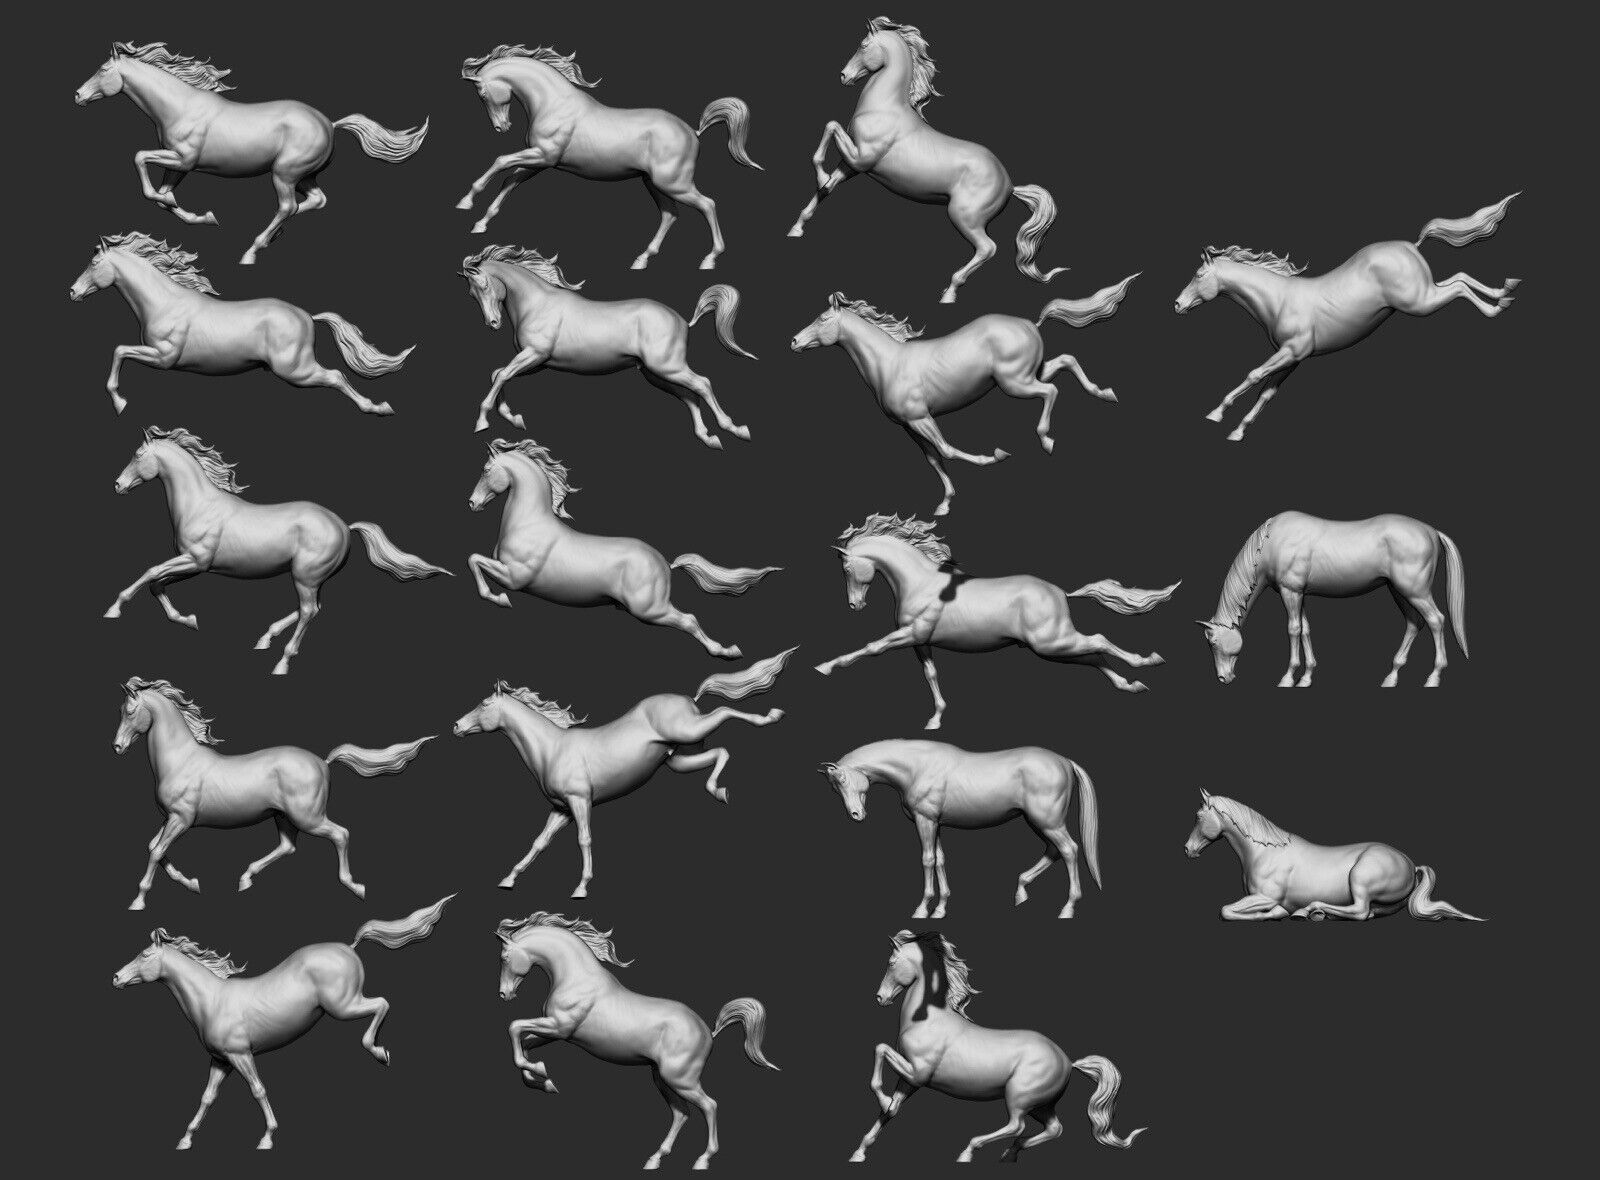 Breyer size 1/12 classic resin scale horse - choose your pose Ready To Paint